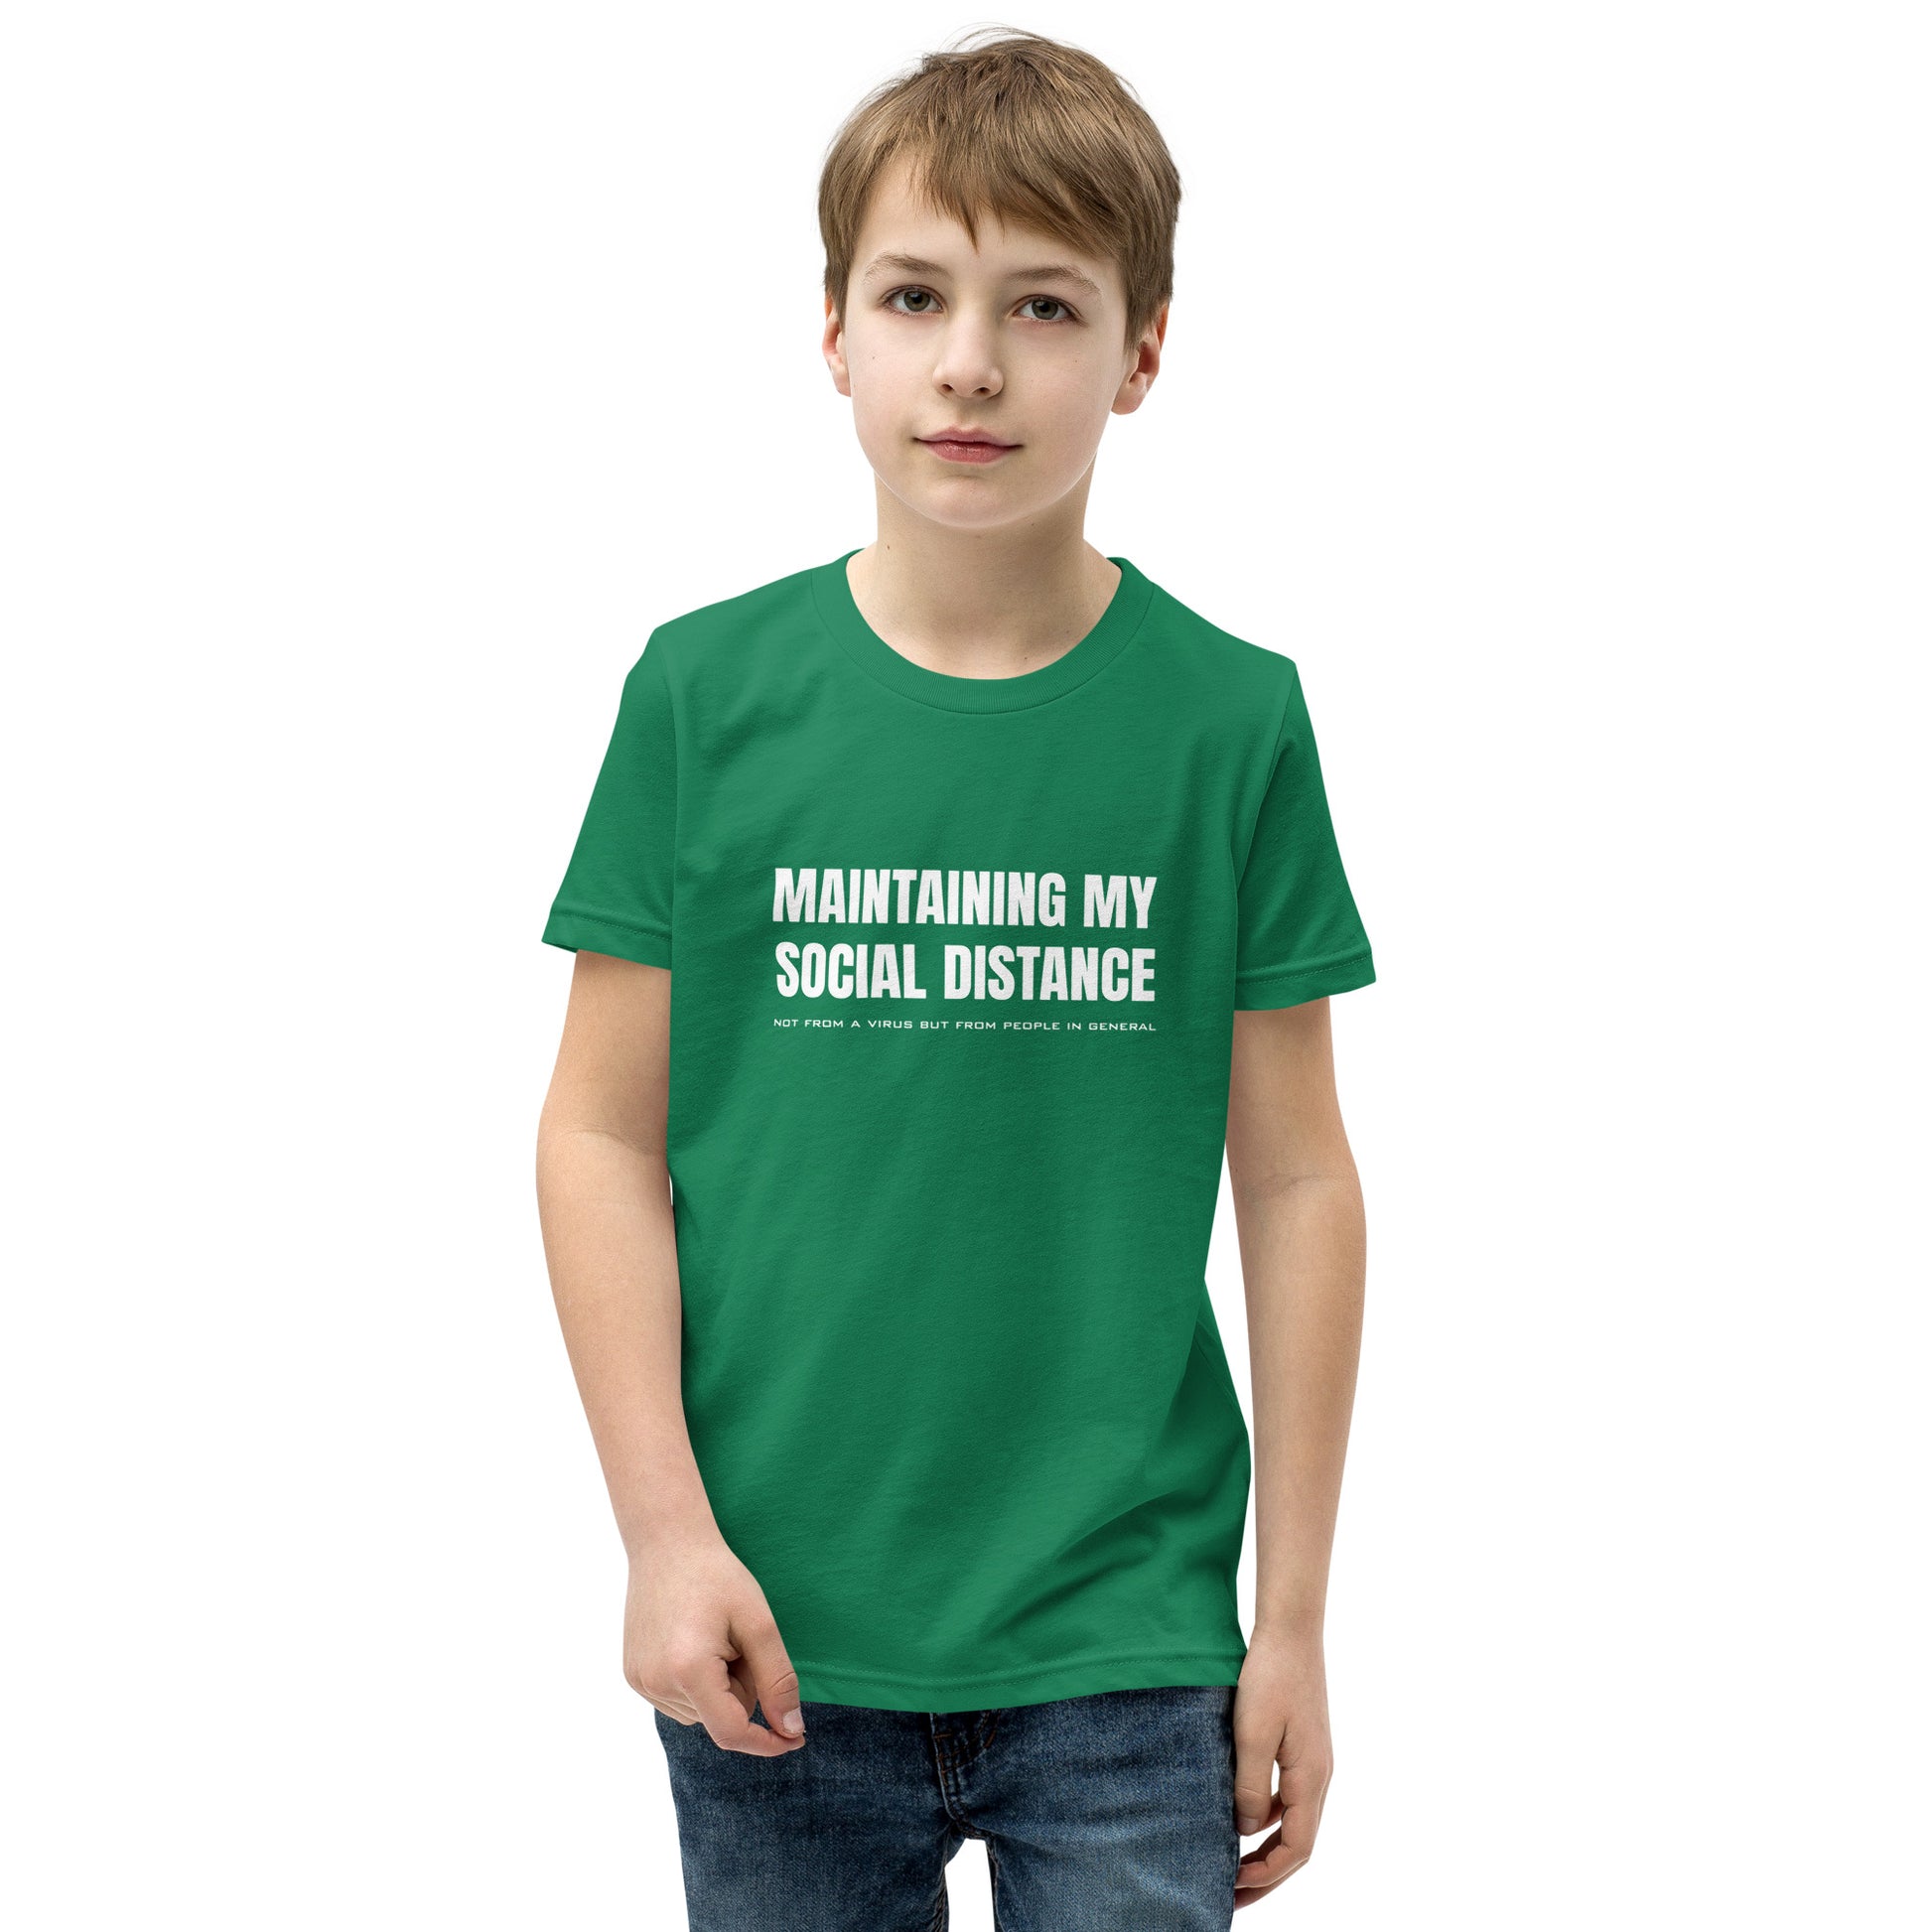 Model wearing Kelly green youth t-shirt with white graphic: "MAINTAINING MY SOCIAL DISTANCE not from a virus but from people in general"